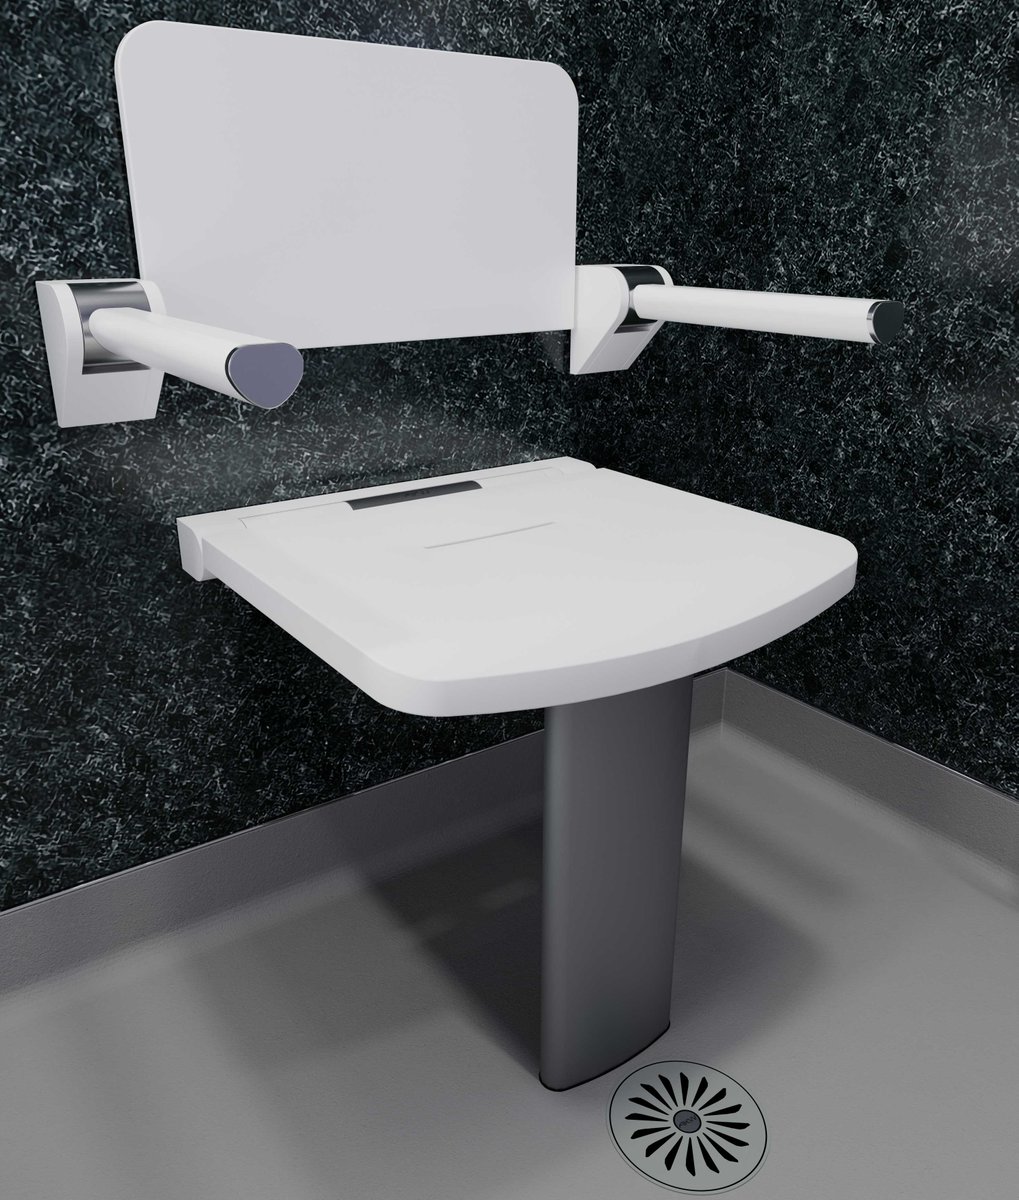 From the Onyx range of contemporary mobility aids comes the Onyx Fold-Up Shower Seat which offers a stylish alternative to adapted solutions, with a lifetime warranty and maximum capacity of 31.5st / 200kg 🪑 View online - loom.ly/8qqd9M4